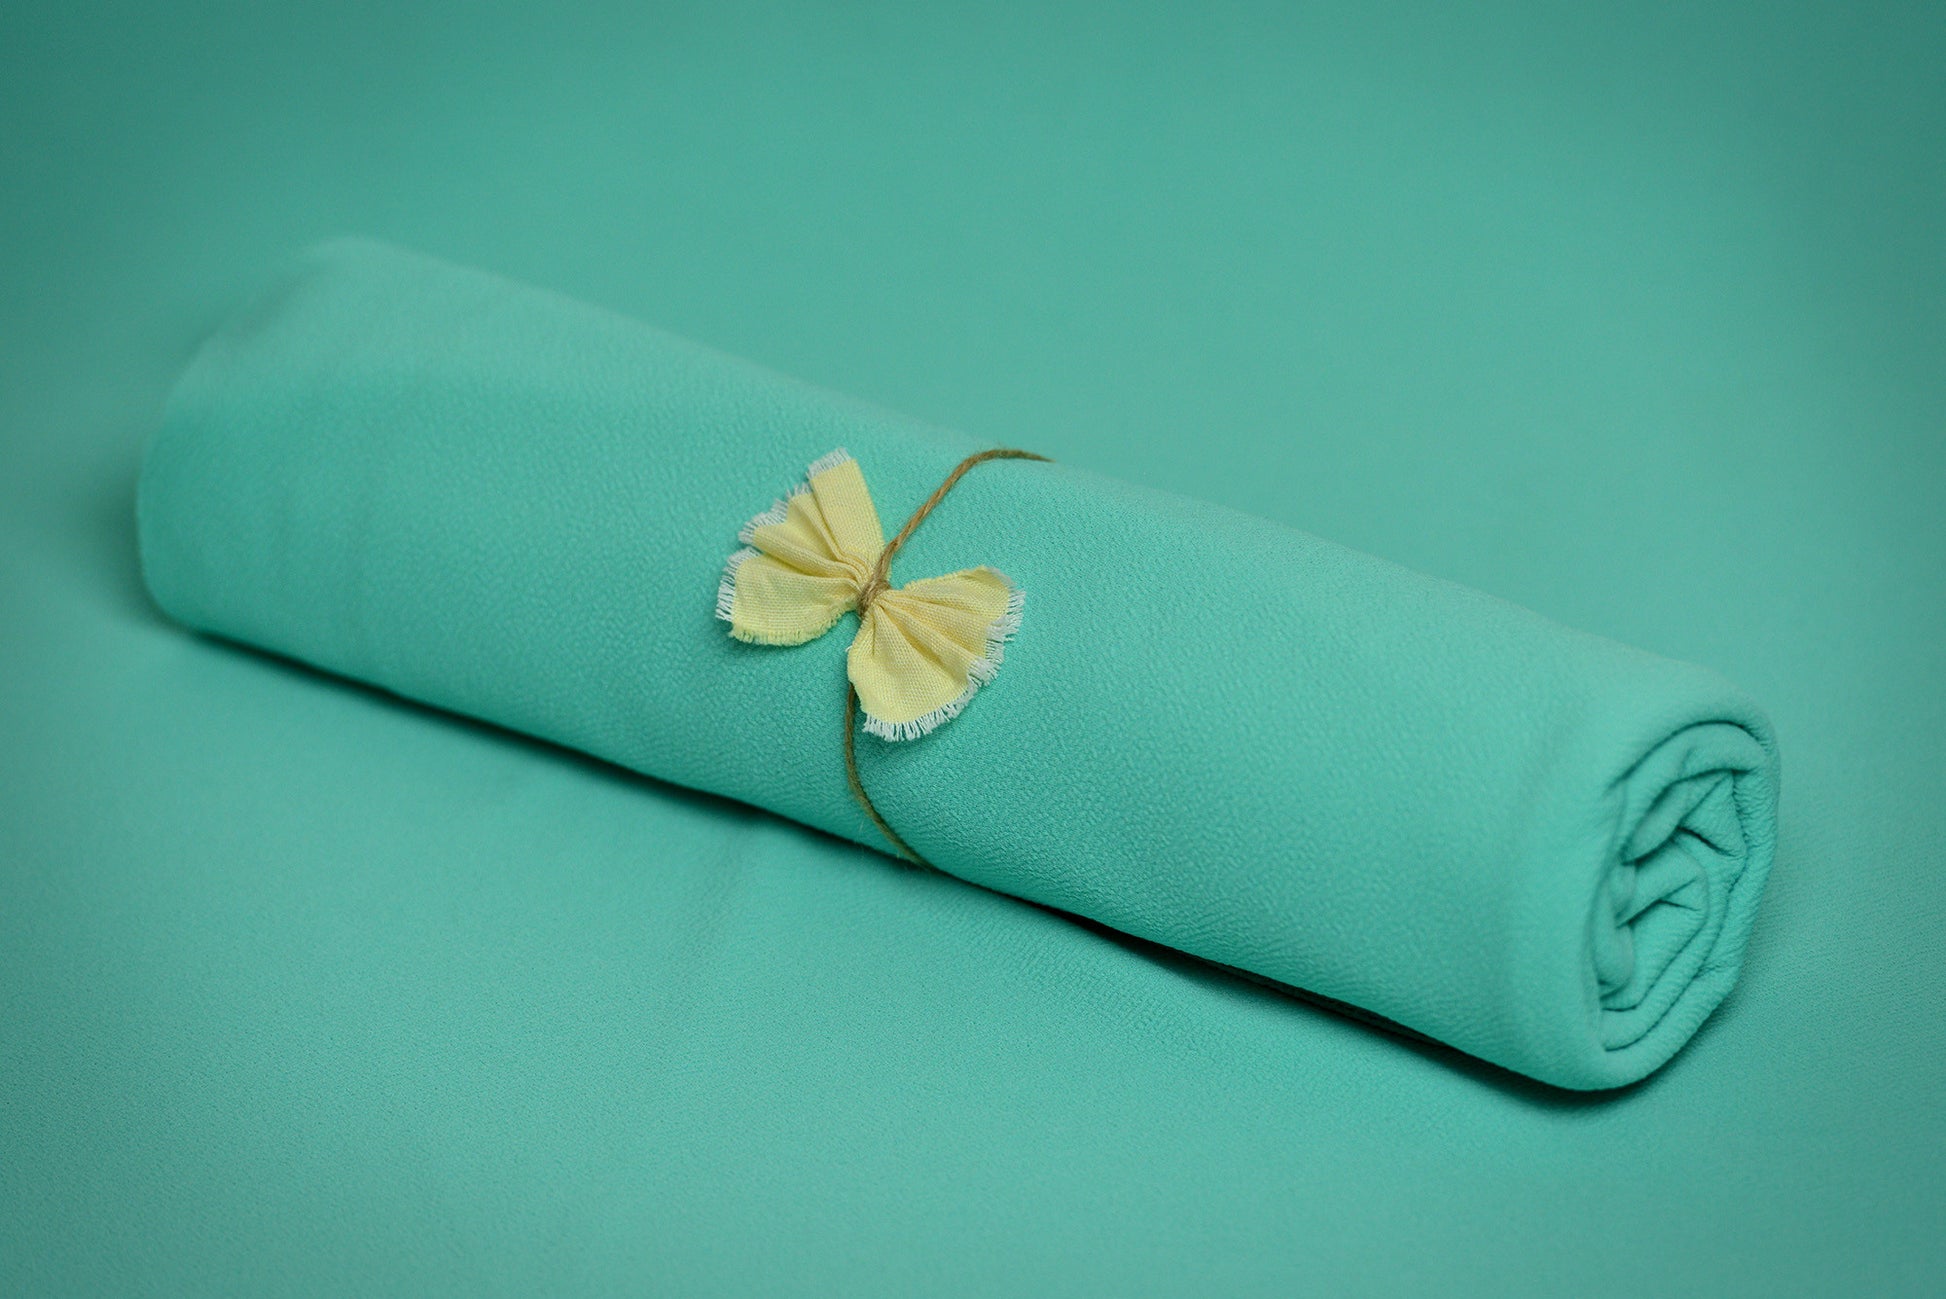 Matching Mini Pillow with Cover AND Bean Bag Fabric - Textured - Mint-Newborn Photography Props